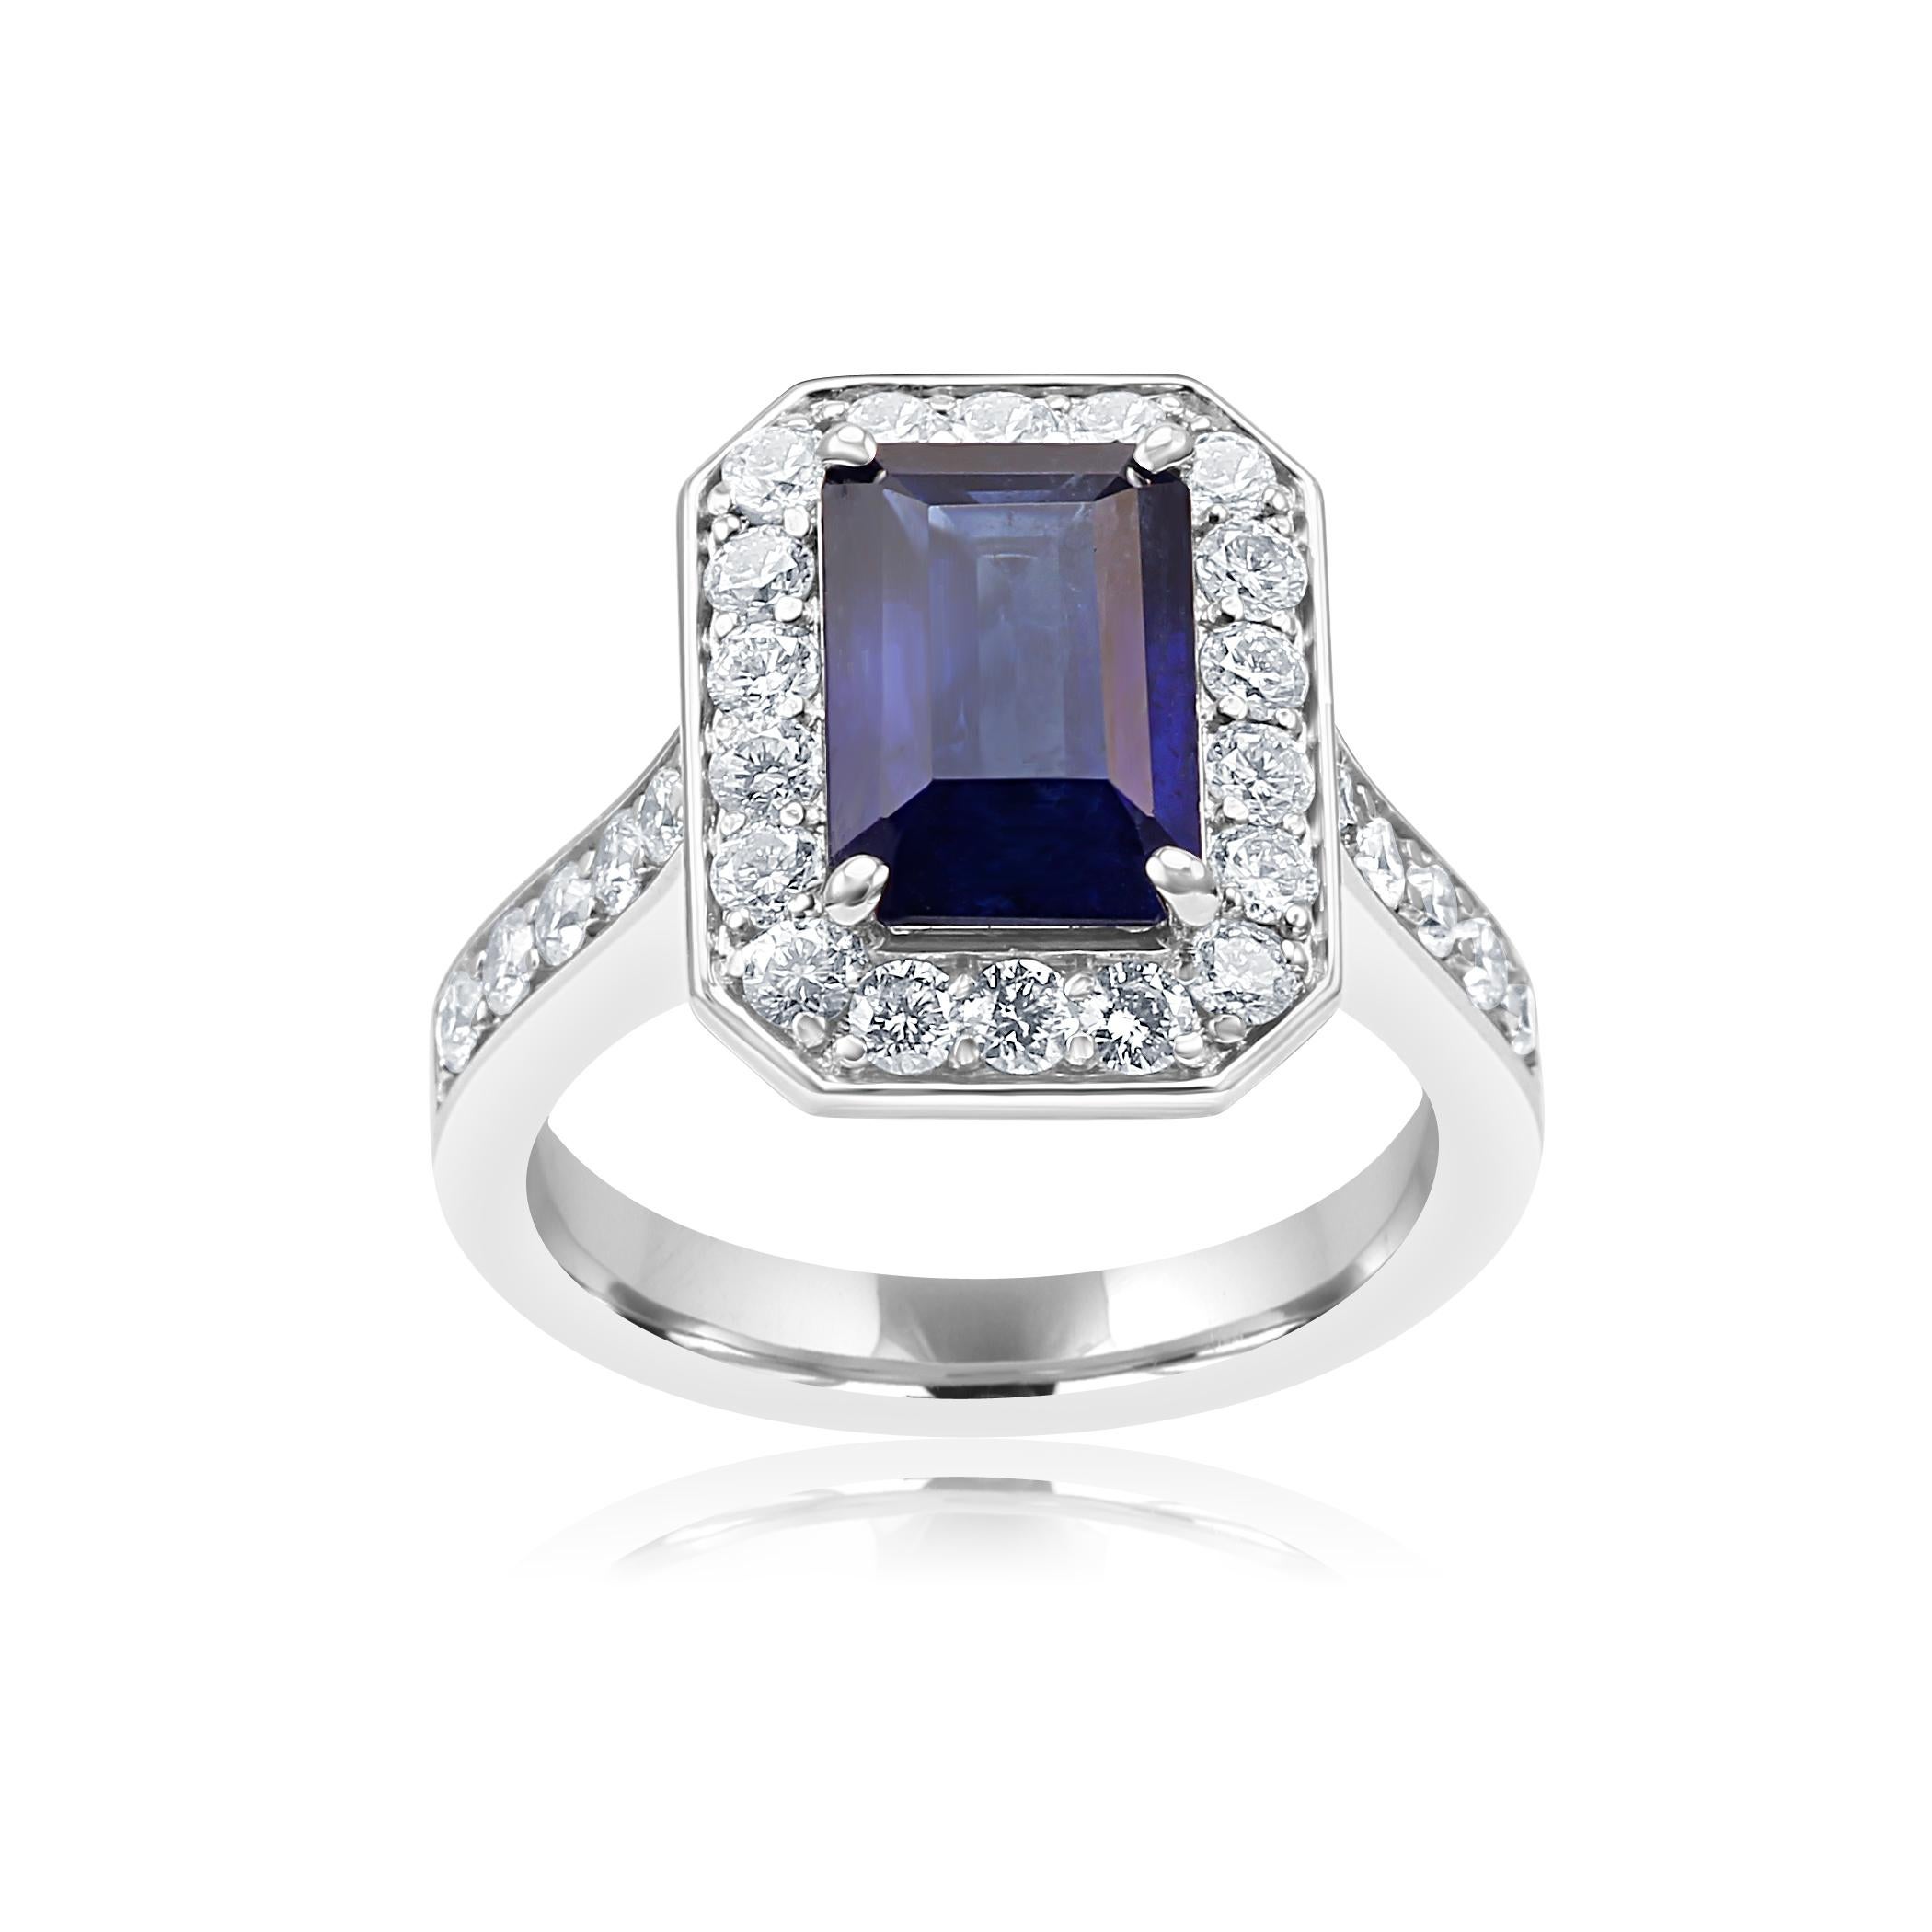 1 Blue Sapphire Emerald Cut 3.57 Carat encircled in single Halo of White G-H Color VS-SI Clarity Round Diamonds 1.10 Carat set in Stunning 18K White Gold Bridal Fashion Cocktail Ring.

Total Stone Weight  4.67 Carat
MADE IN USA
Style available in